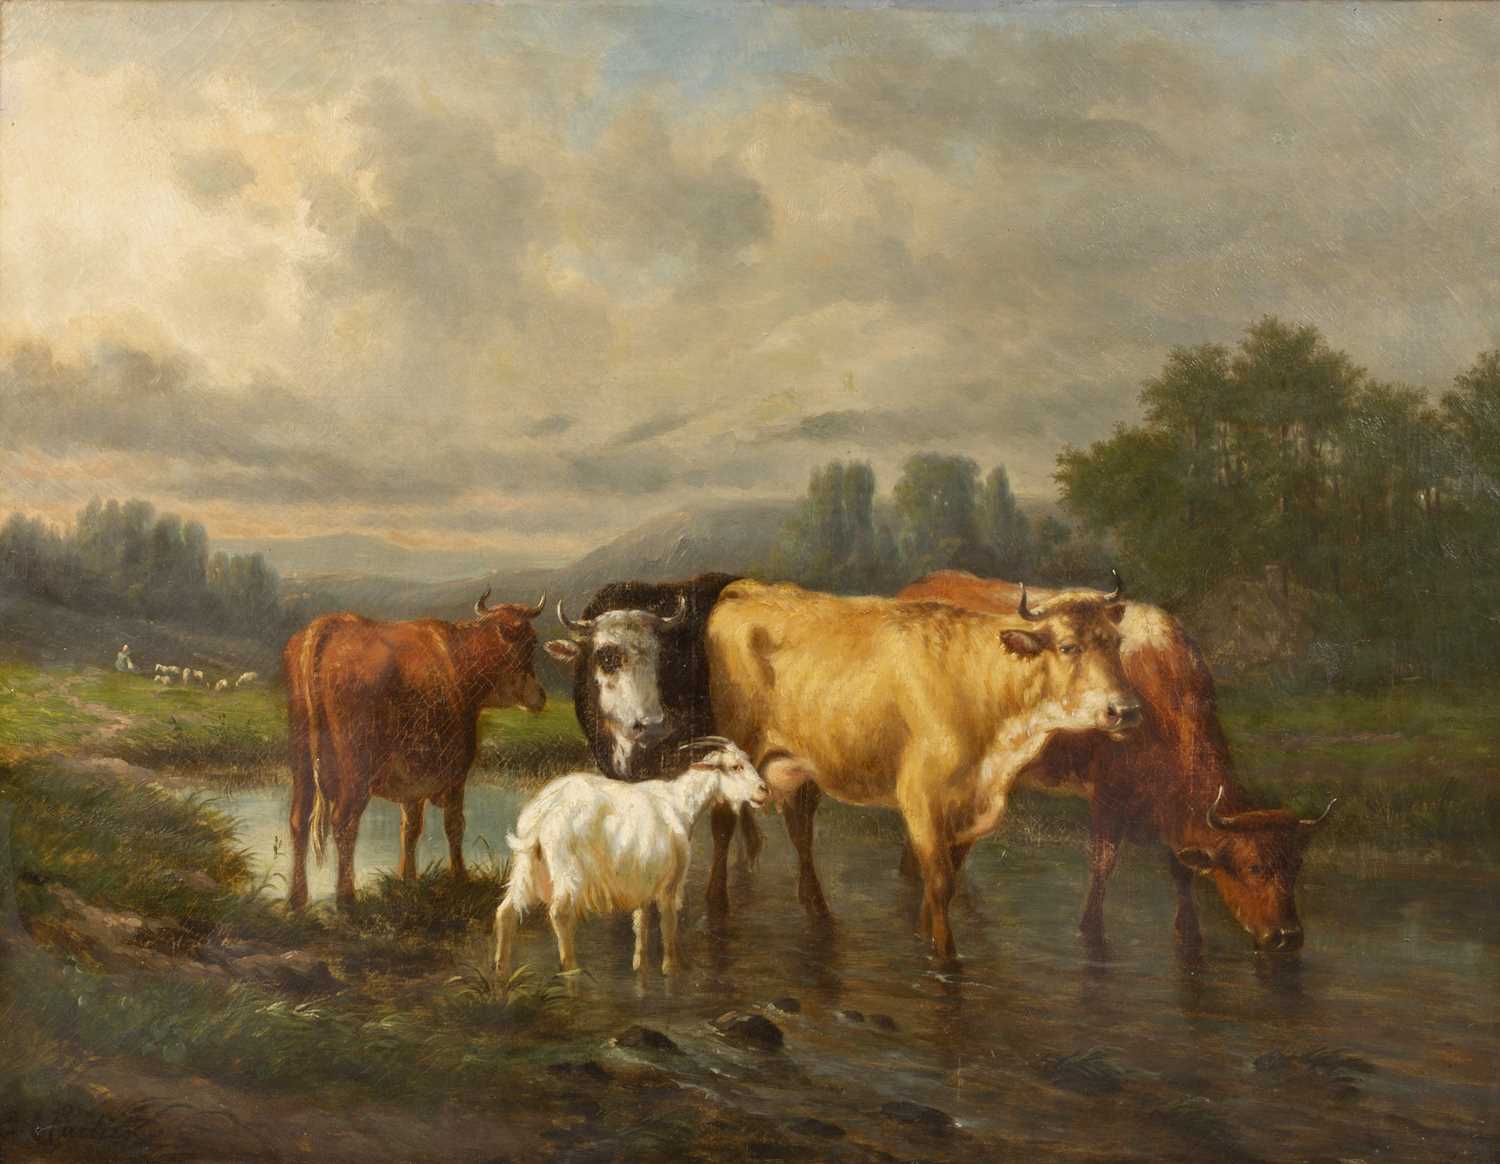 Victor Emile Cartier (b.1811-d.1866), cattle watering in a stream joined by a goat